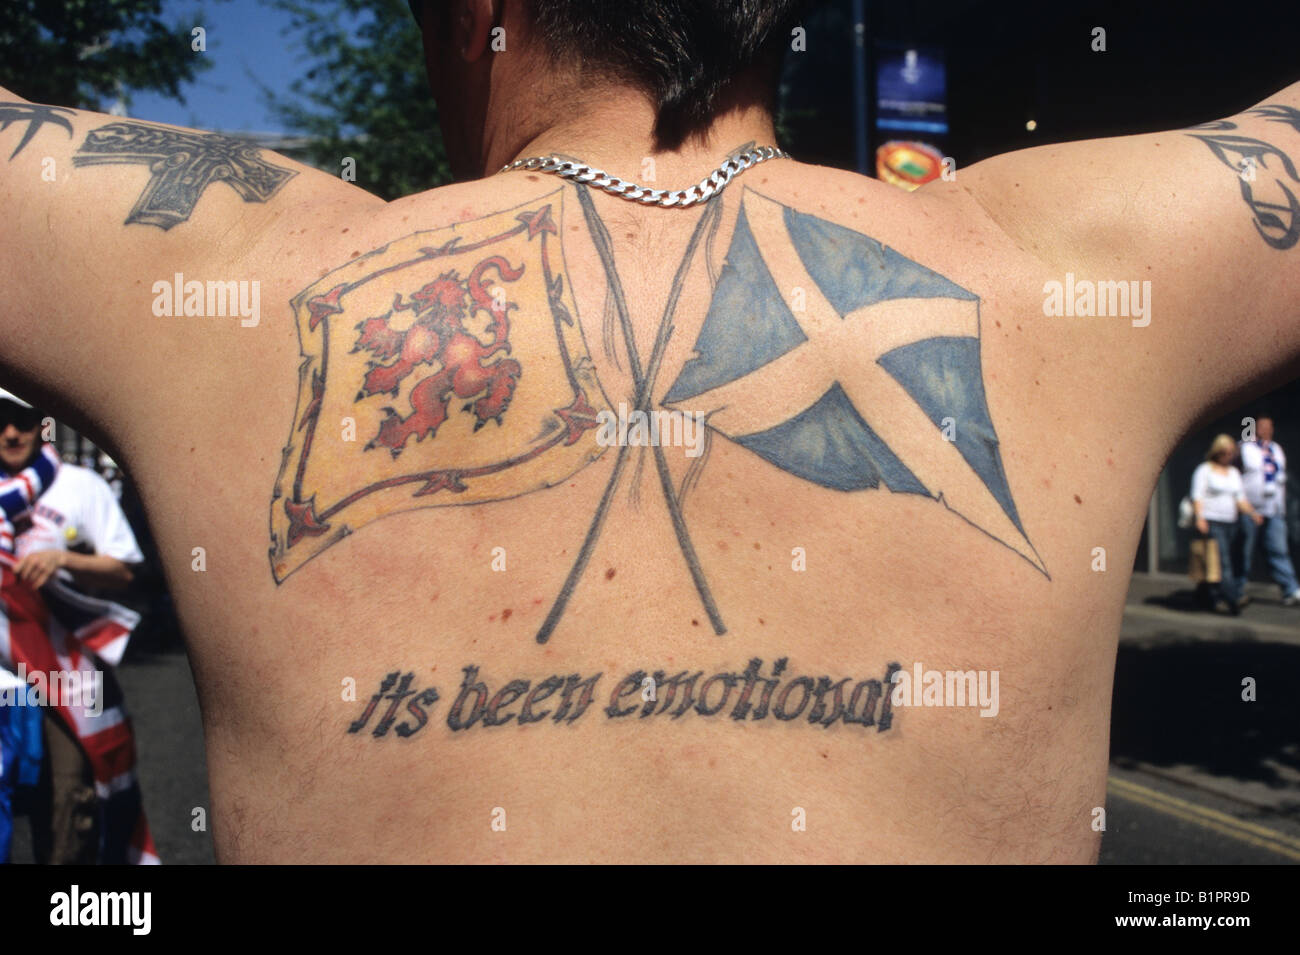 Rangers Football Fan With Tattoo On His Back Showing The Scottish Flag Stock Photo